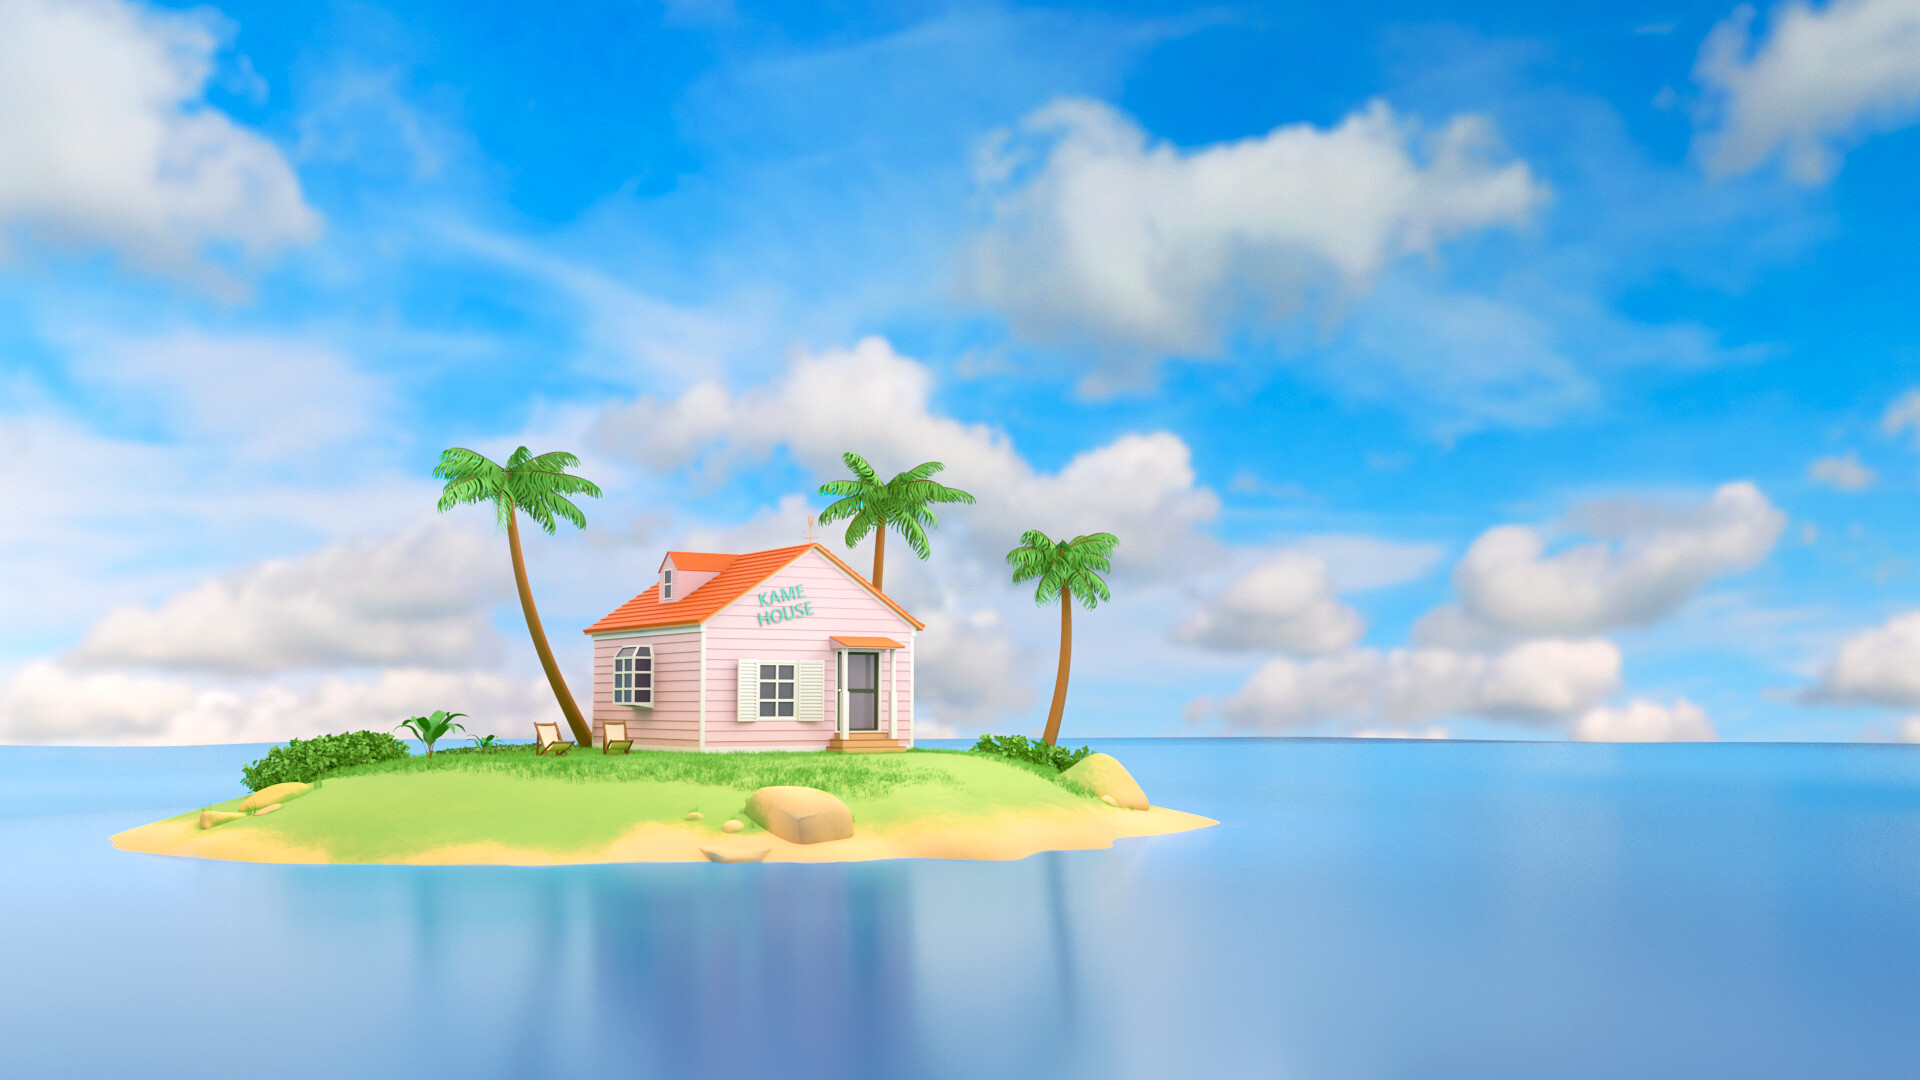 Kame House HD Wallpapers Background Images. 